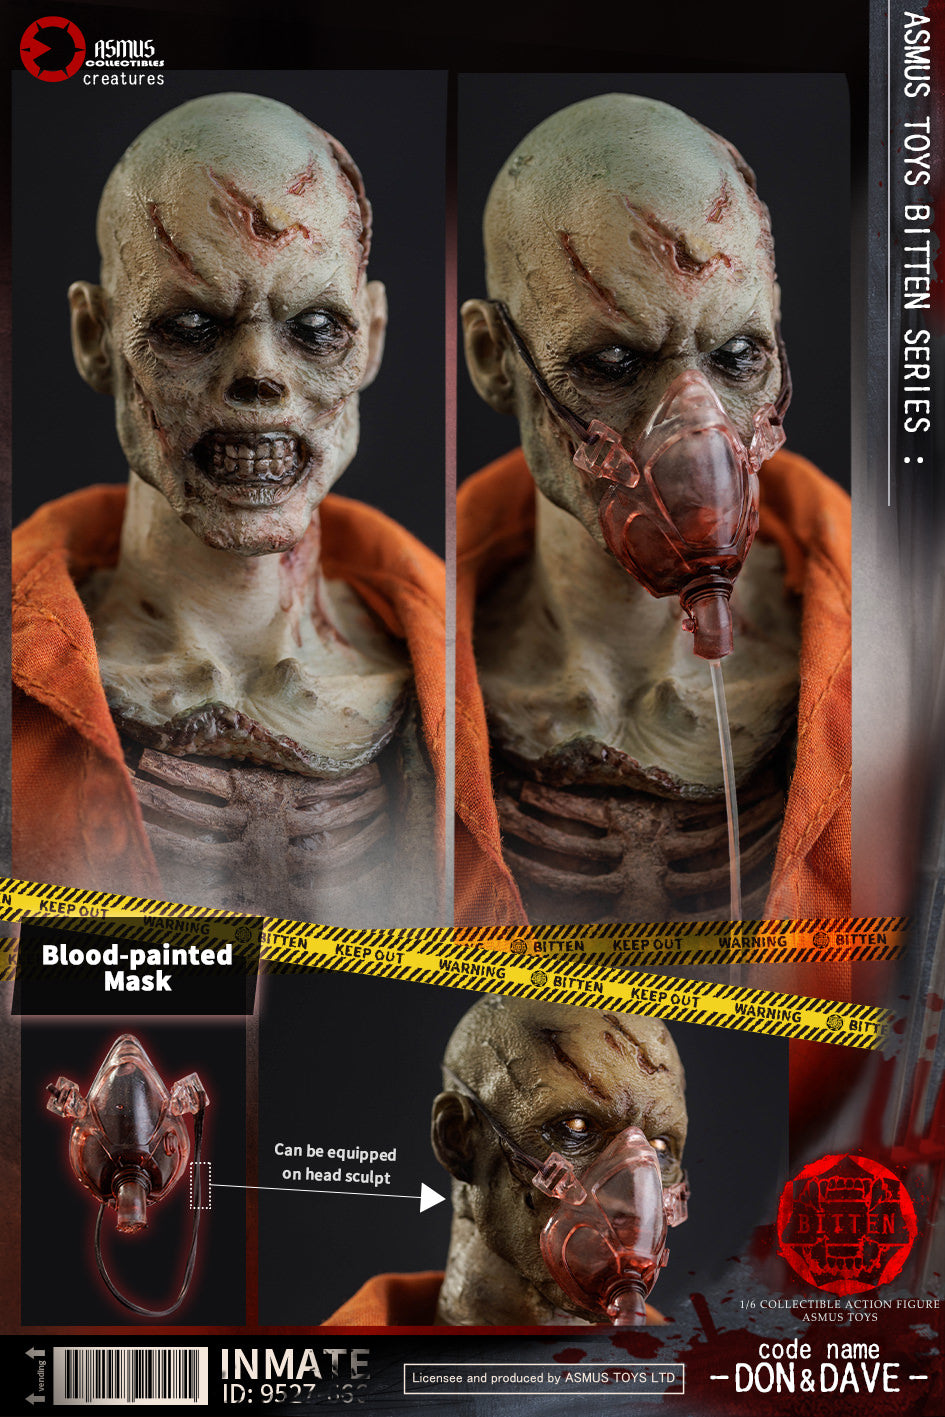 Bitten: Don Sixth Scale Figure by Asmus